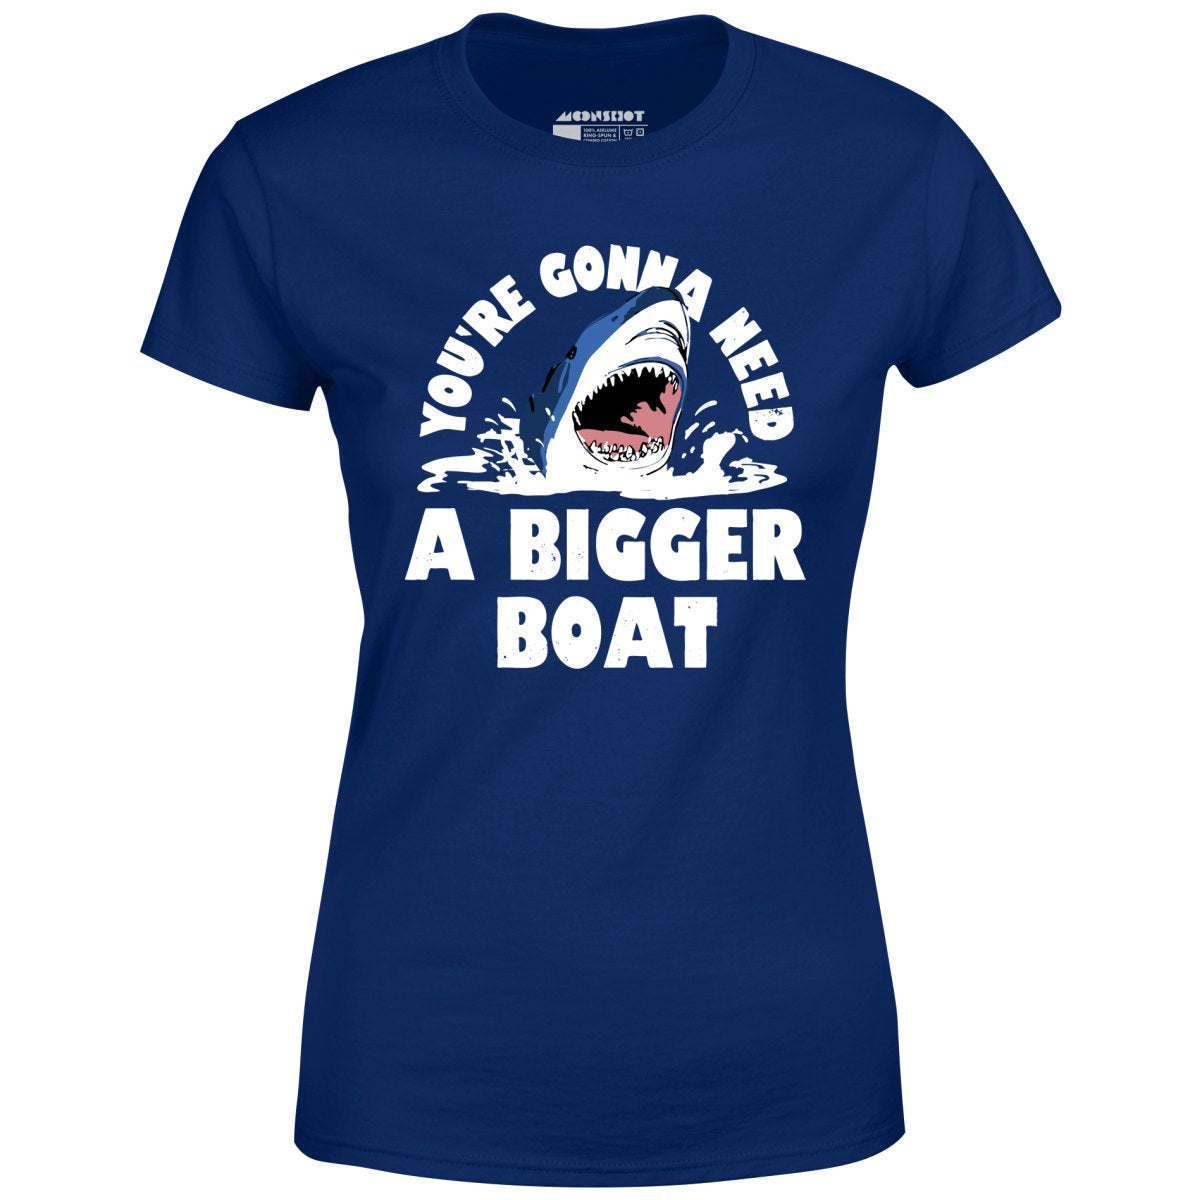 You're Gonna Need A Bigger boat - Women's T-Shirt